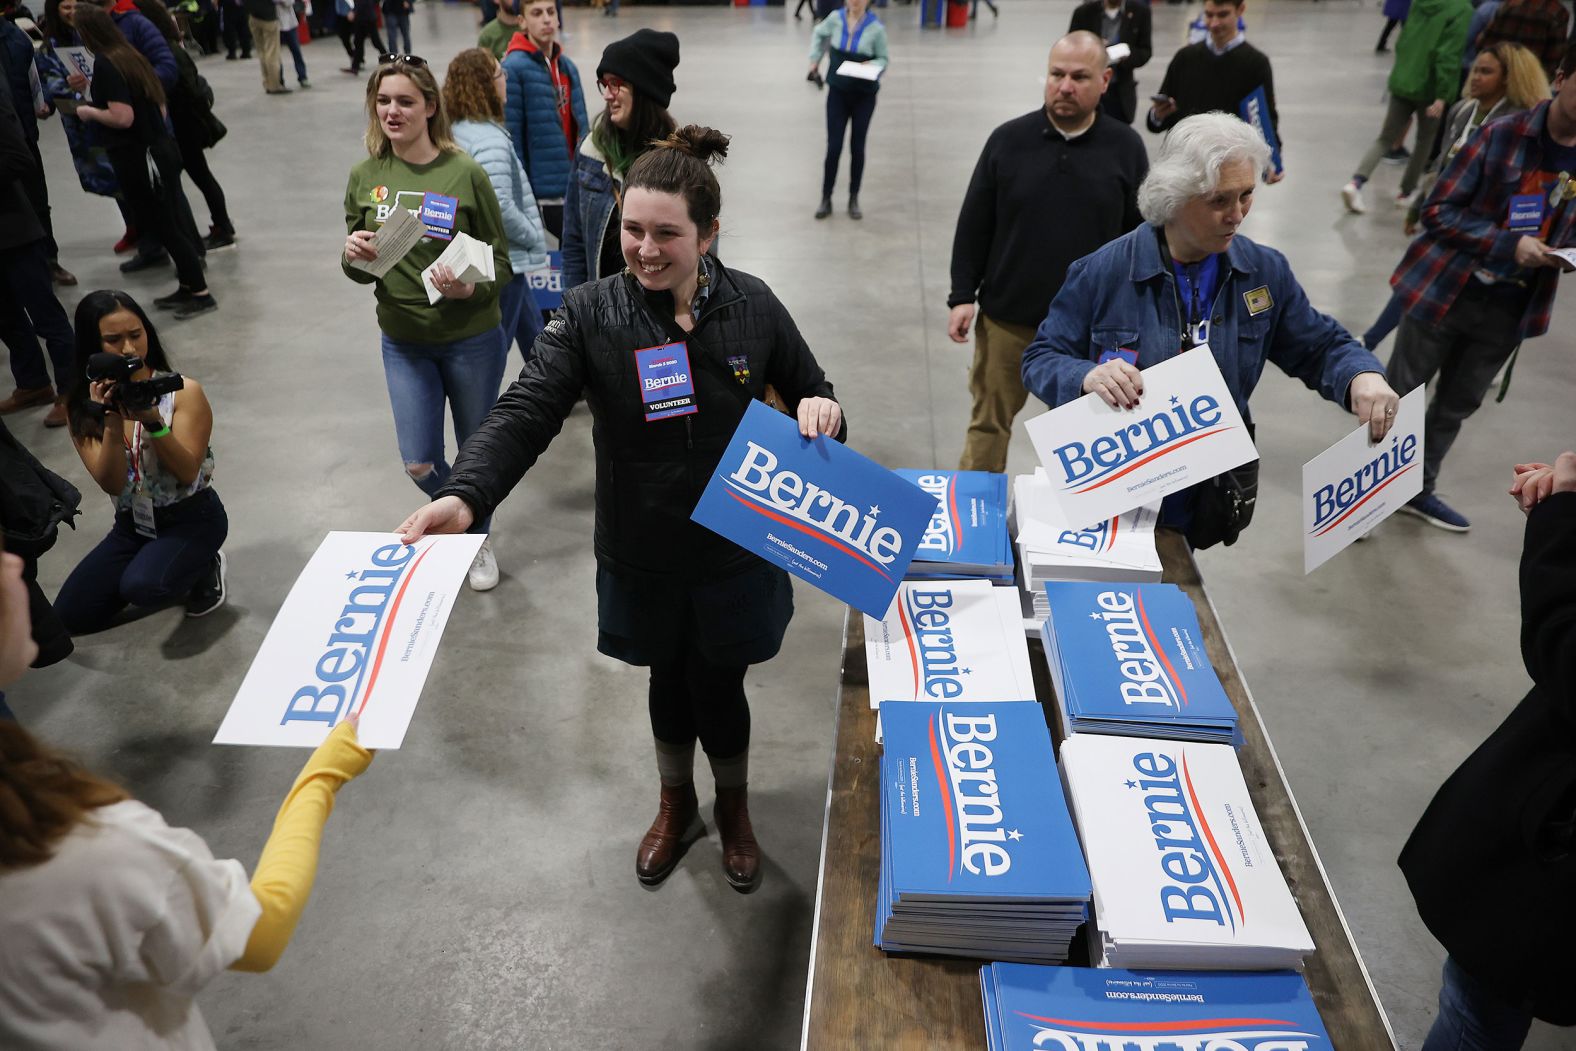 Volunteers hand out campaign signs for Sanders in Essex Junction, Vermont.